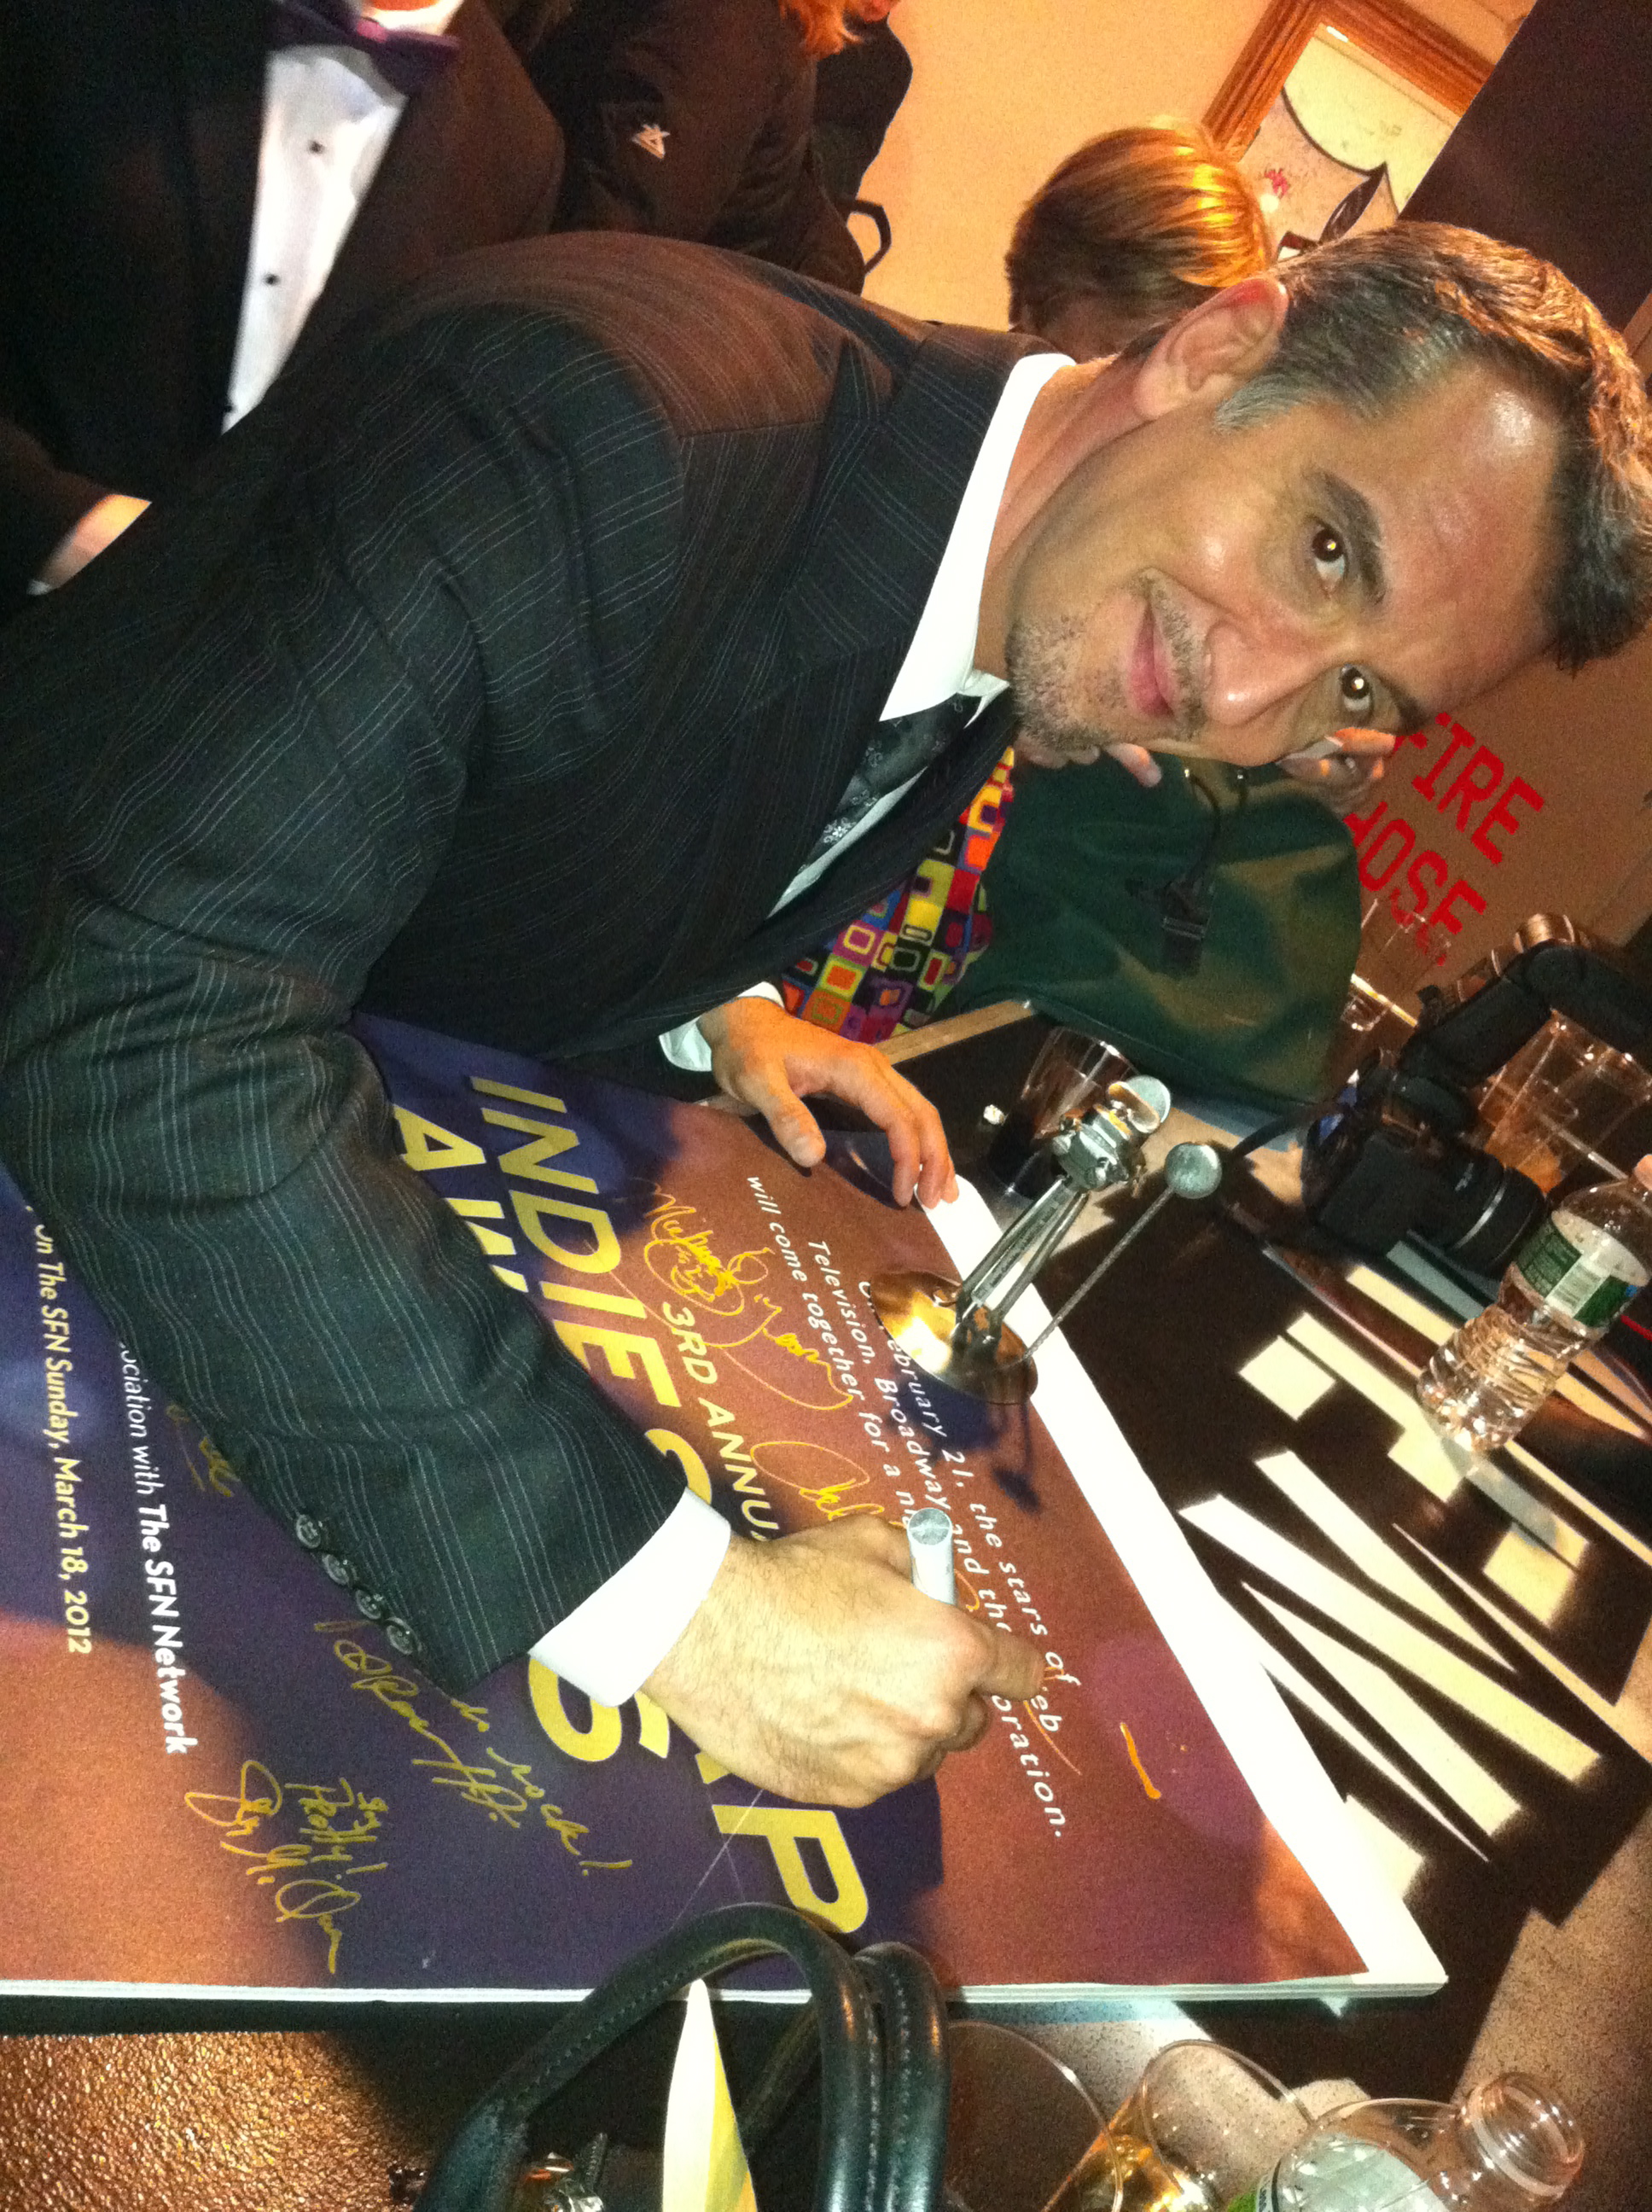 Signing the Indie Soap Awards Winners Poster for receiving BEST ACTOR-Comedy in Vampire Mob